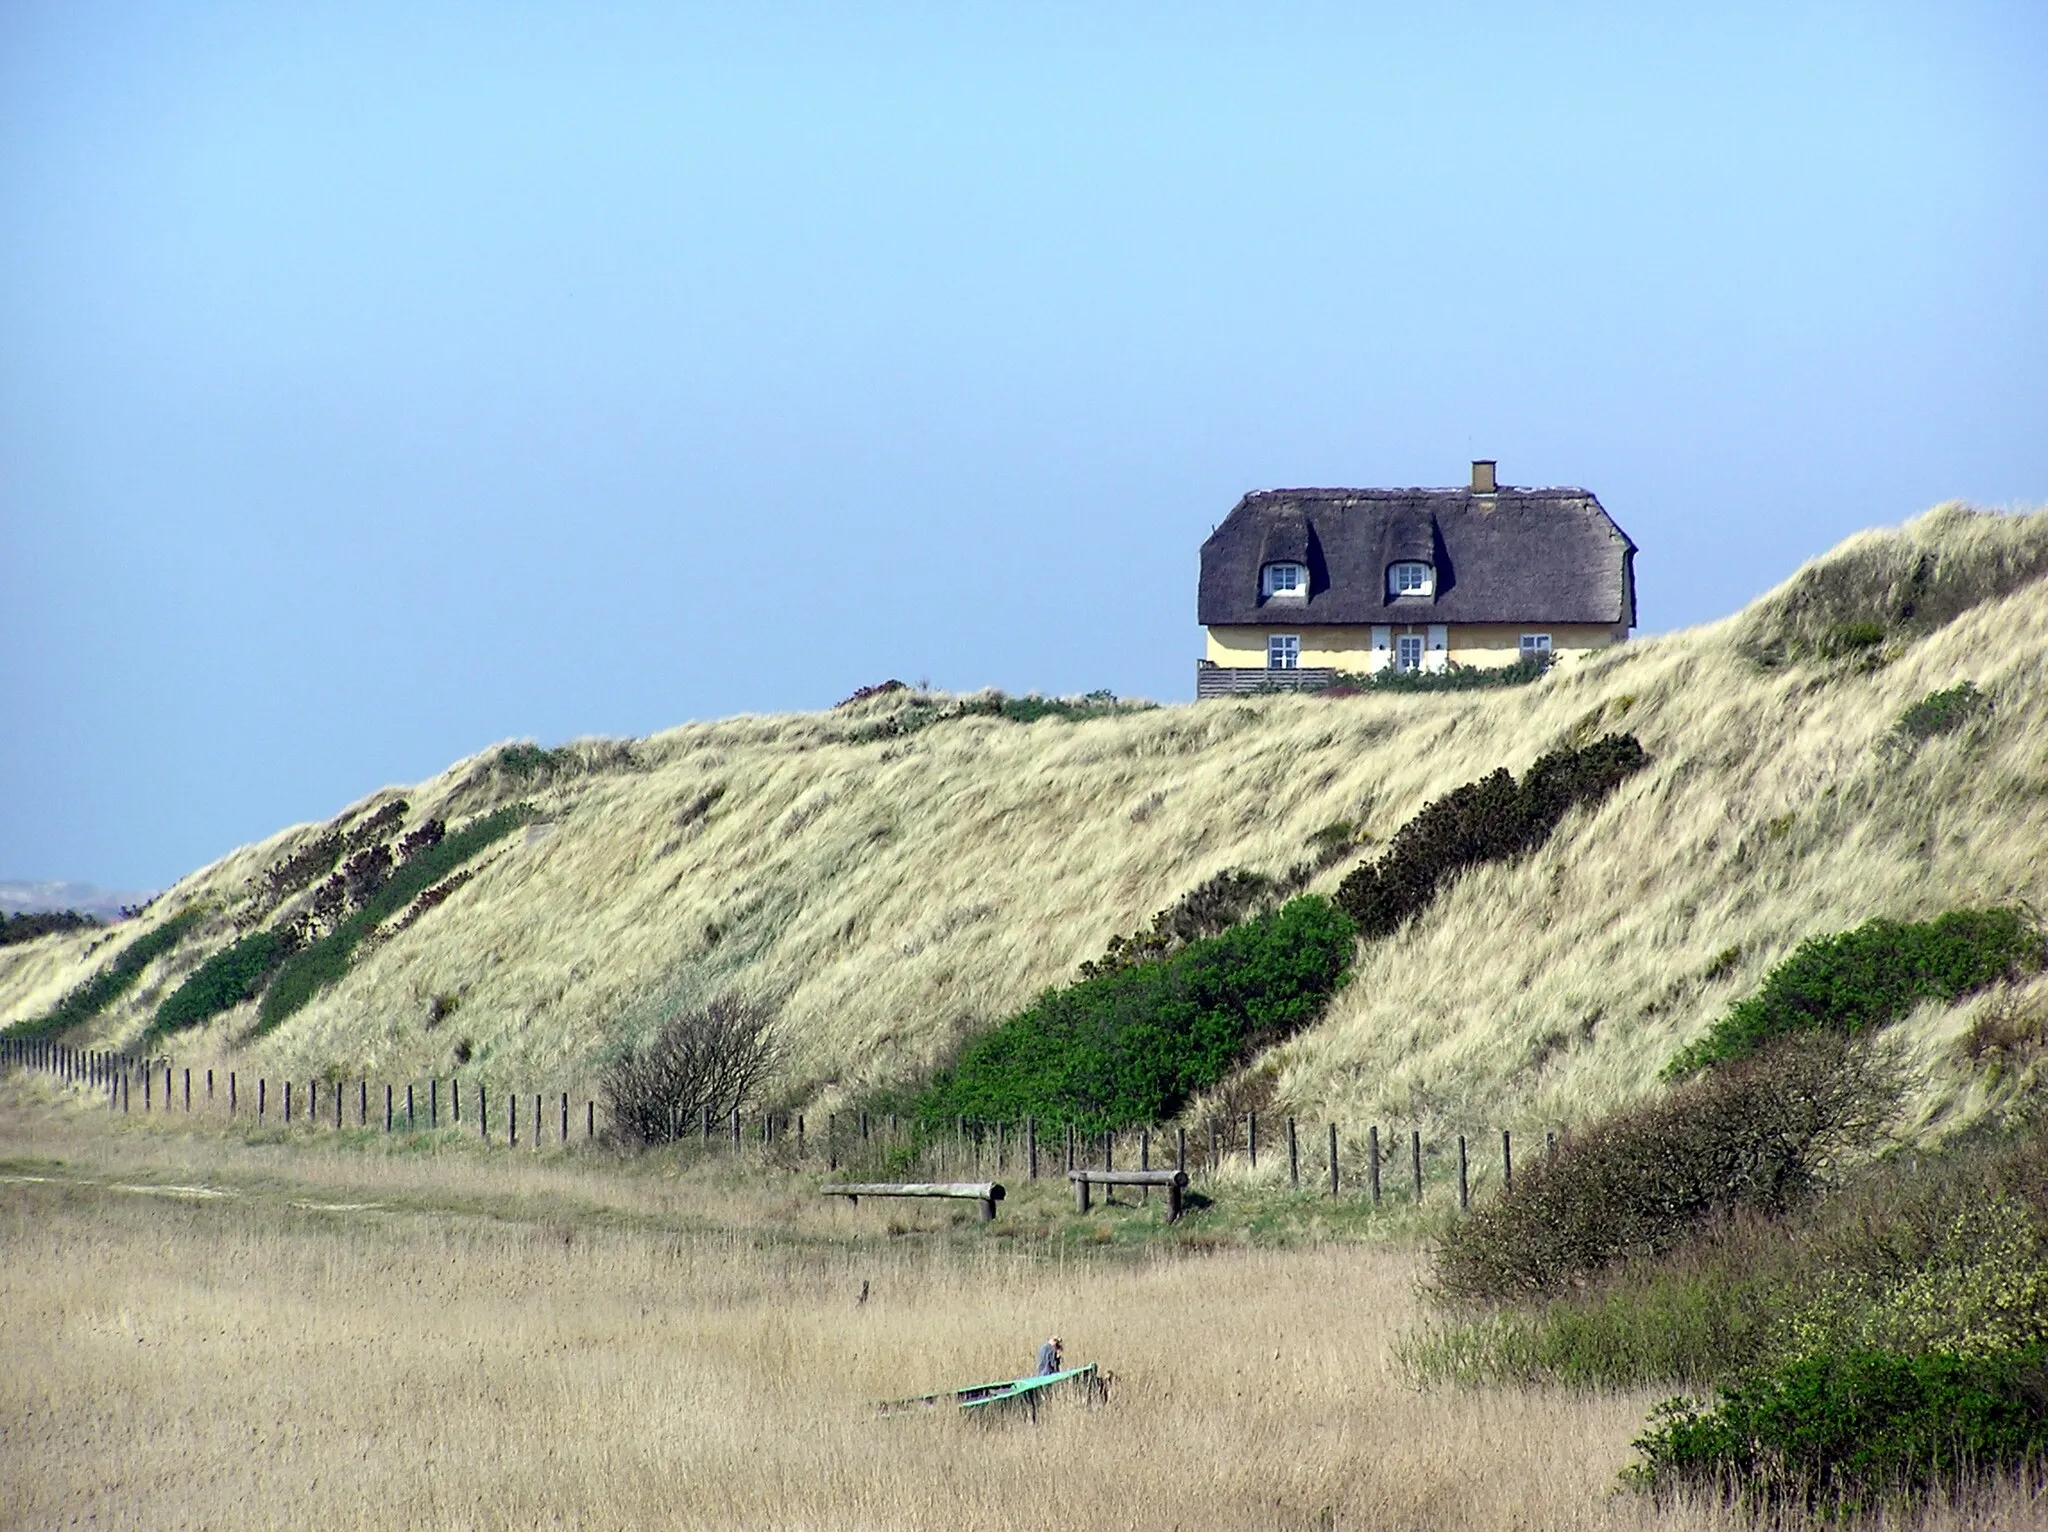 Photo showing: The house on the hill at Nymindegab in the west of Jutland, Denmark